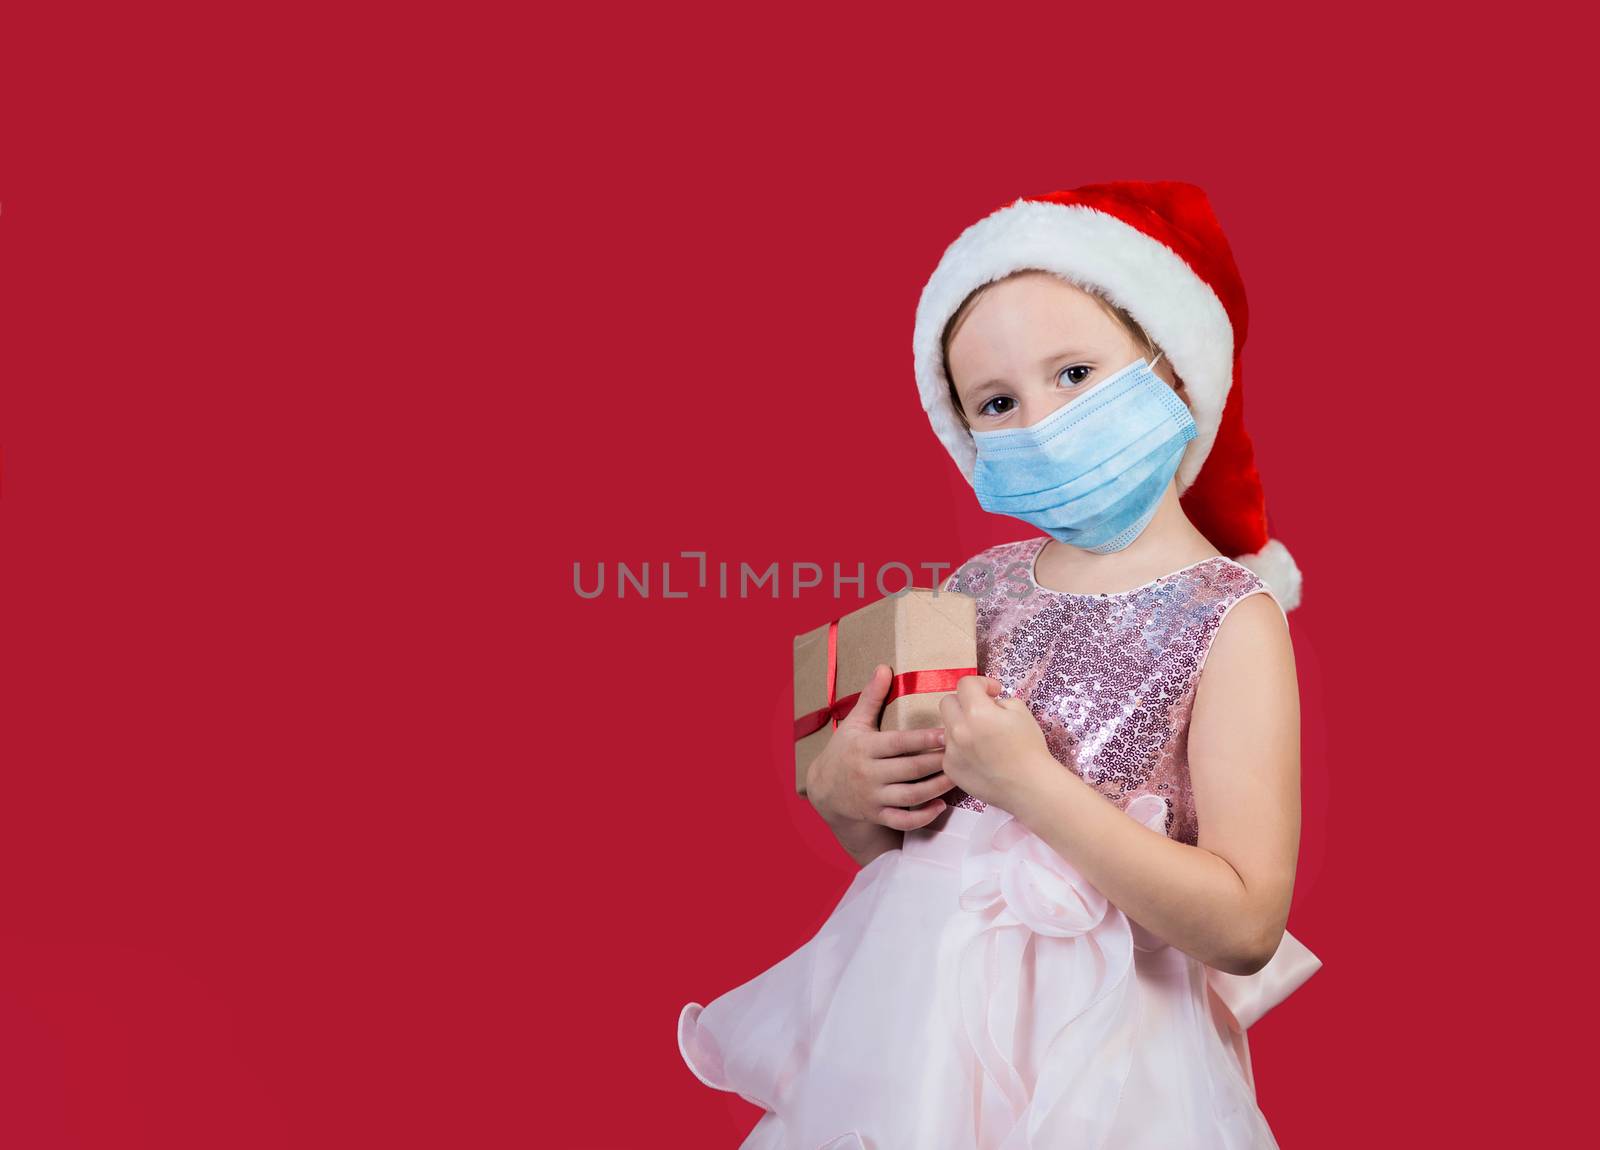 Adorable cacusian little girl wearing medical mask in santa hat with gift box celebrating happy New Year isolated on red background. Merry Christmas presents shopping sale.